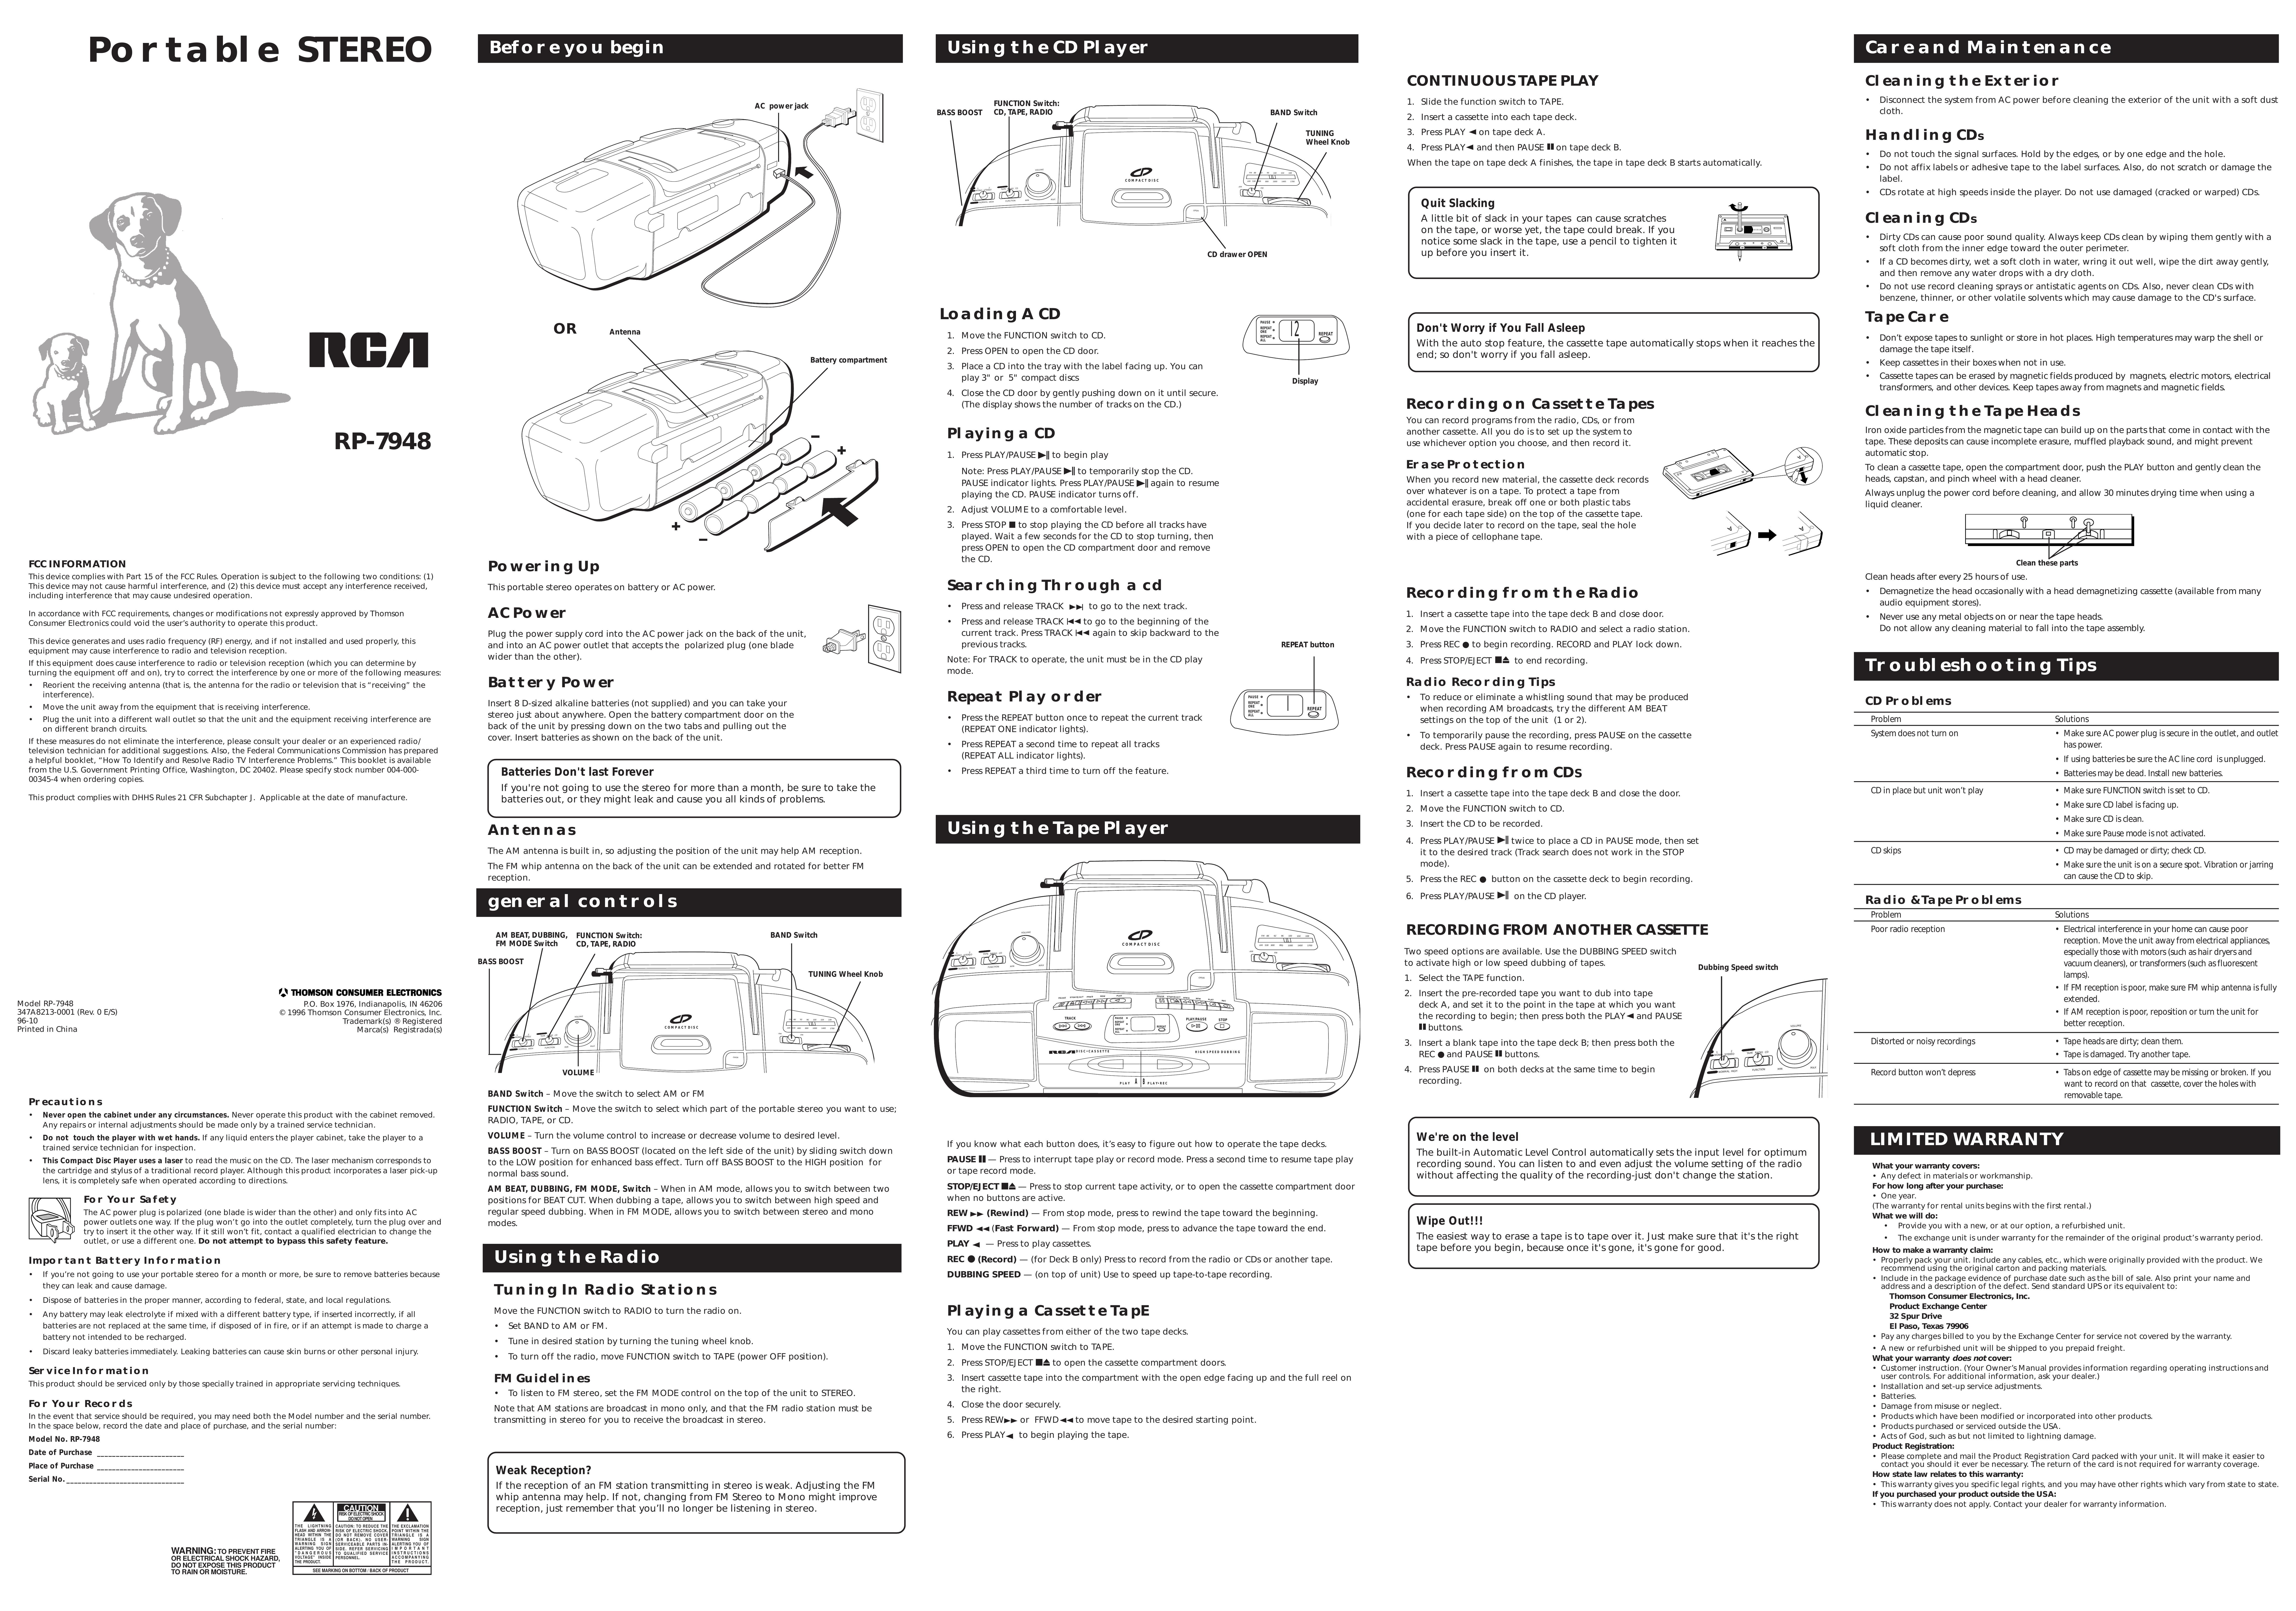 RCA RP-7948 Stereo System User Manual